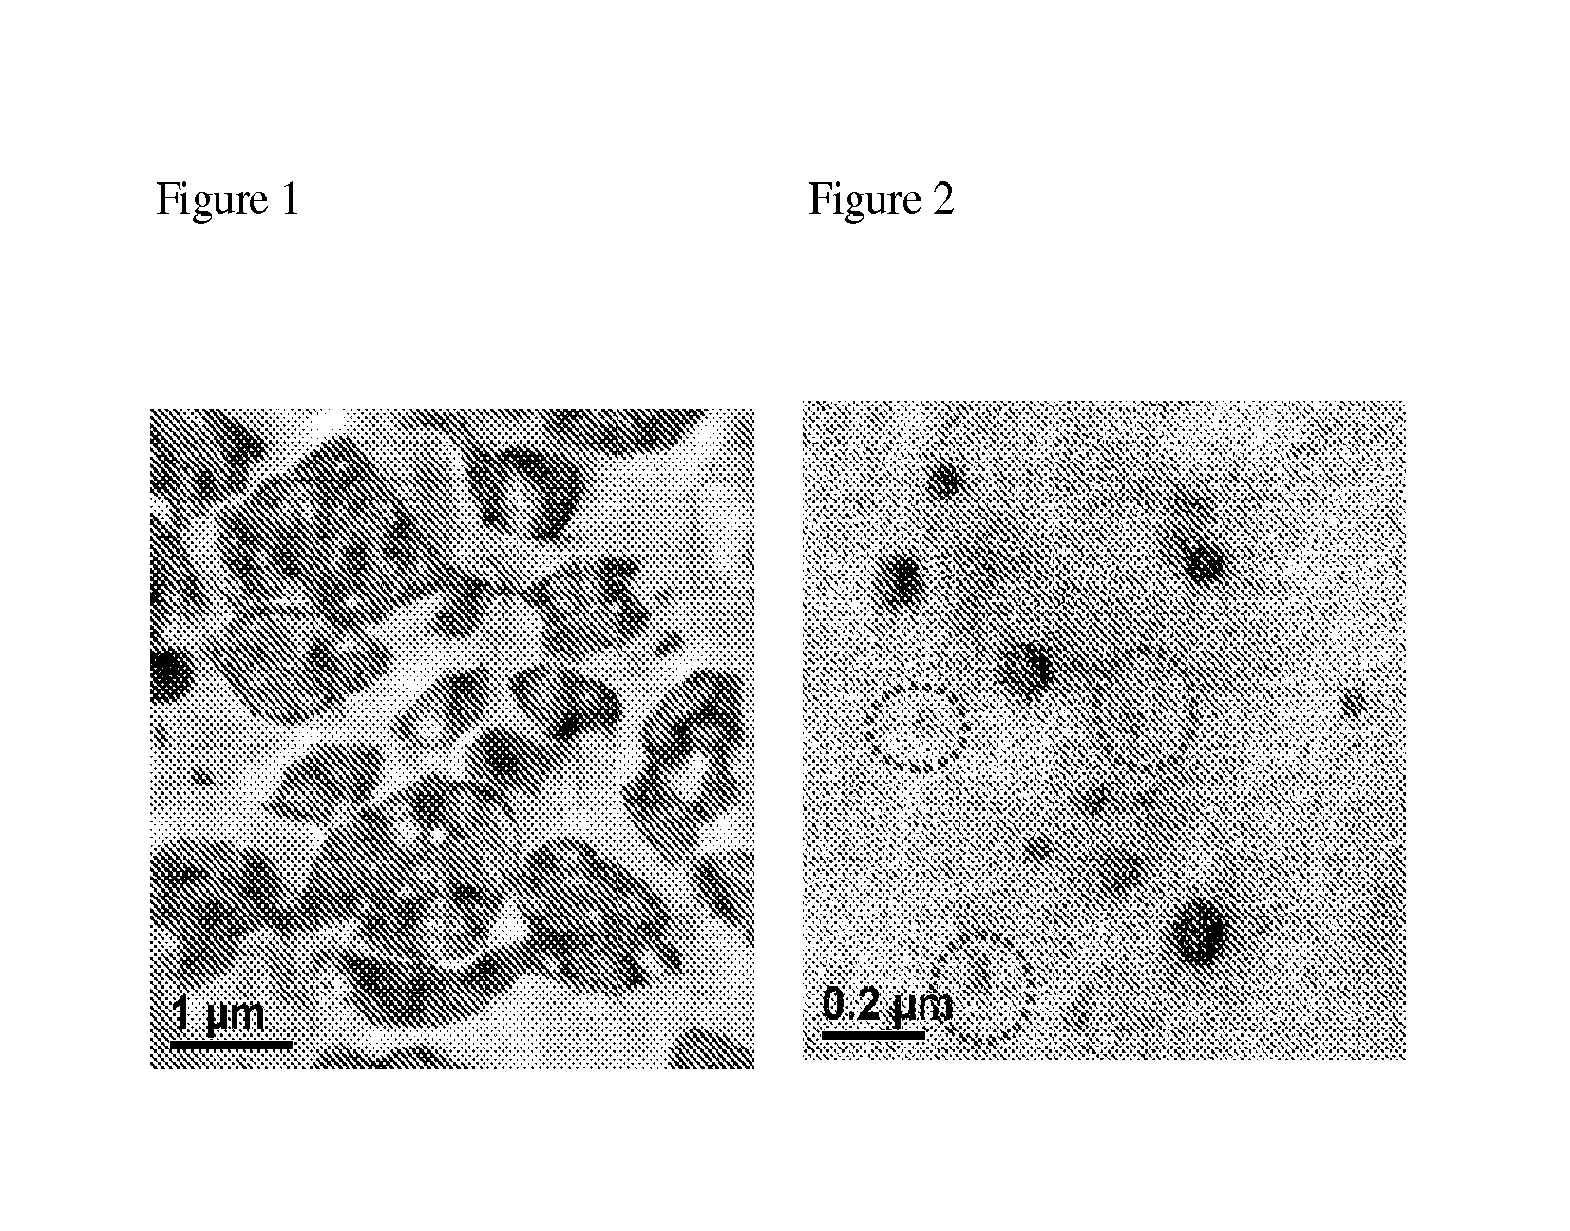 Fabricated articles comprising polyolefins